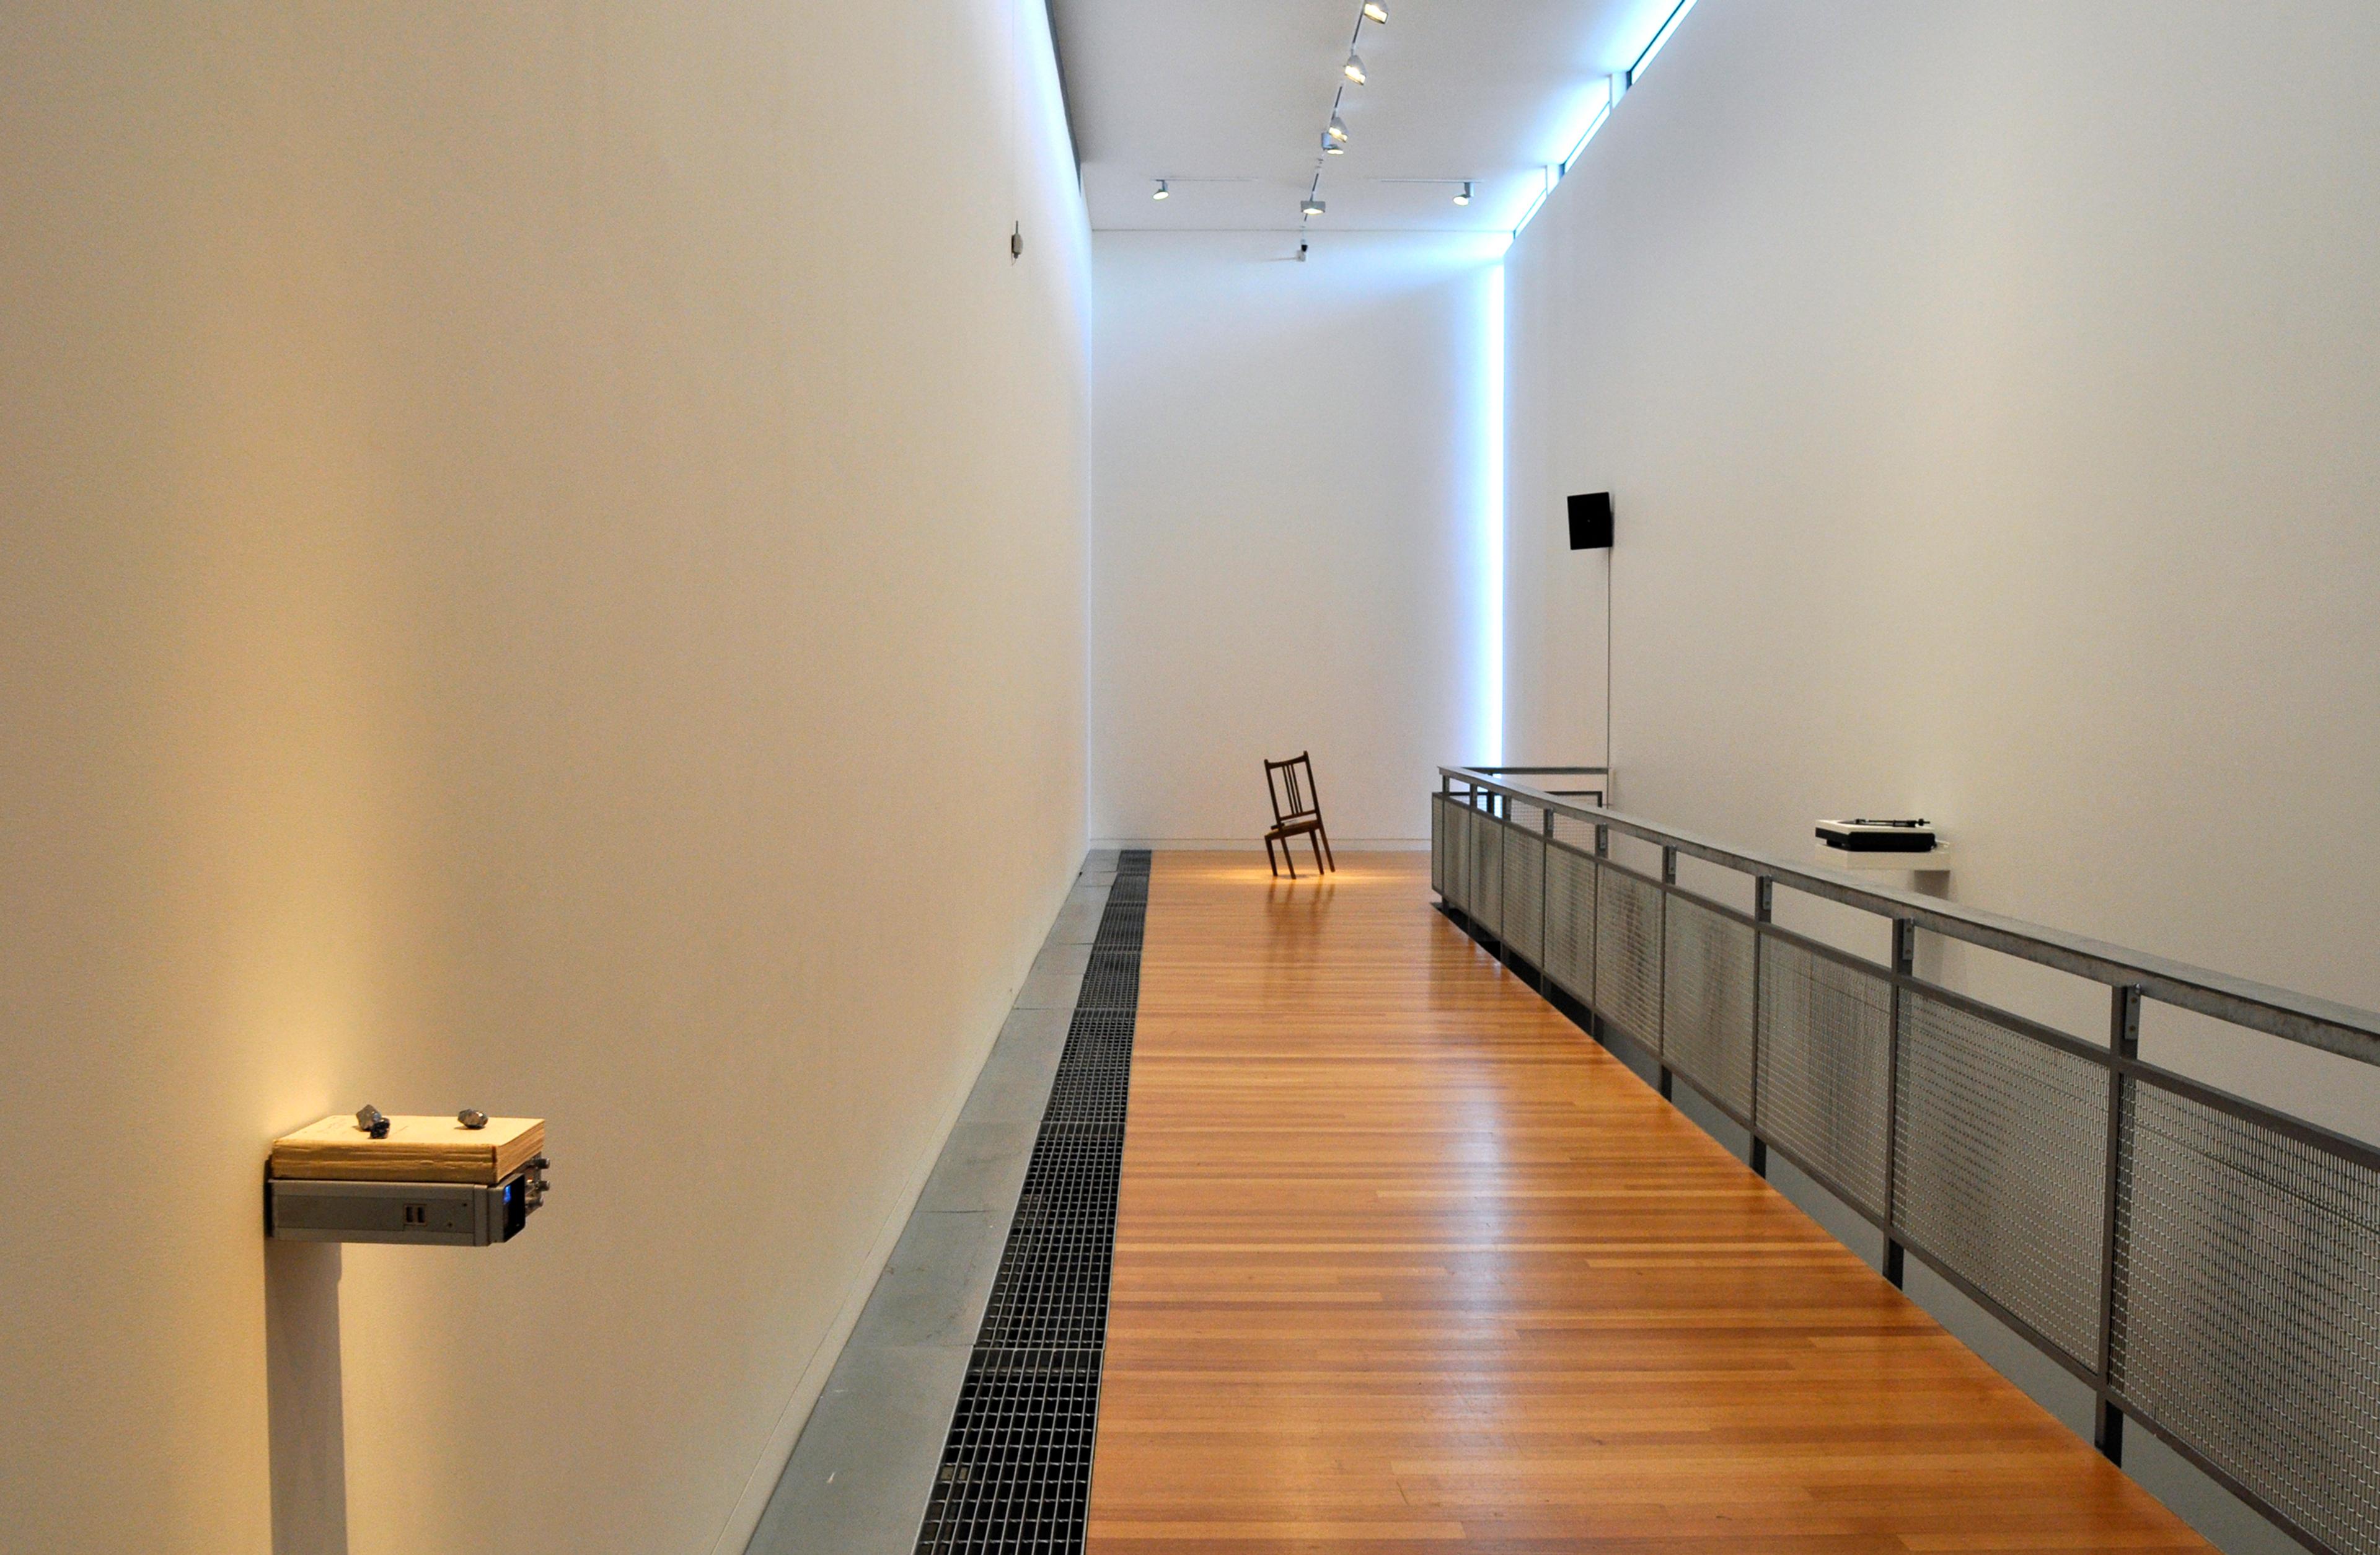 Torben Tilly & Robin Watkins, Fig. 2: On Seeing Through Obstacles, Across Space and Round Corners, 2008; Fig. 3: Infinity-Created Hollow Spaces, 2008. Installation view, Object Lessons: A Musical Fiction, Adam Art Gallery Te Pātaka Toi, Victoria University of Wellington. Photo: Michael Salmon